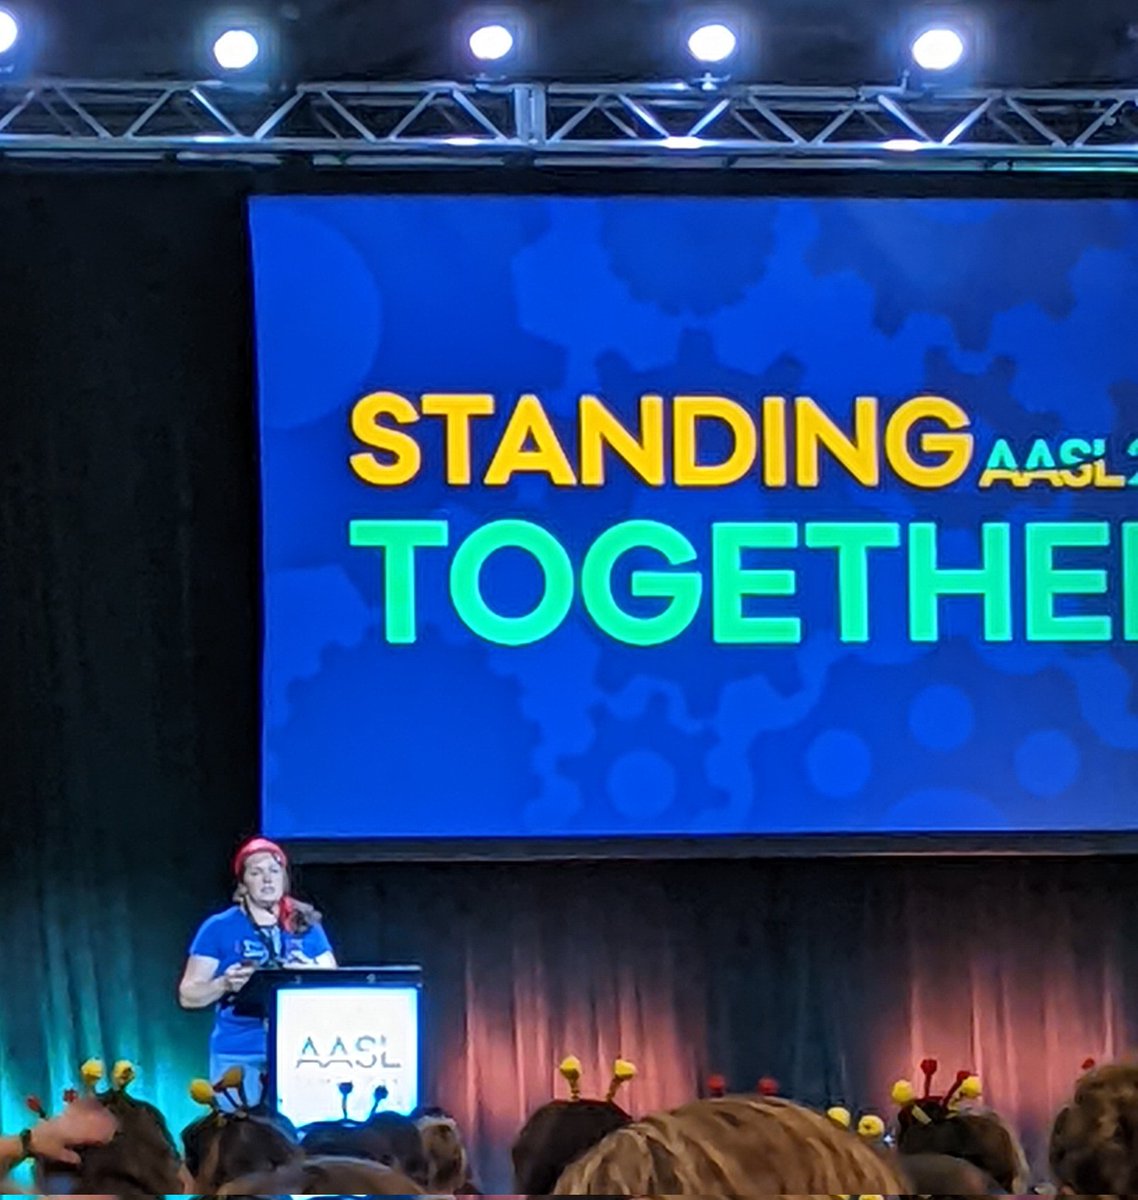 @ #AASL23 #RallytoRead listening to an amazing woman & librarian - helping Florida's librarians stay the course and be heard. @LibraryDaniels
FAME President. #youROCK #NYsupportsyou